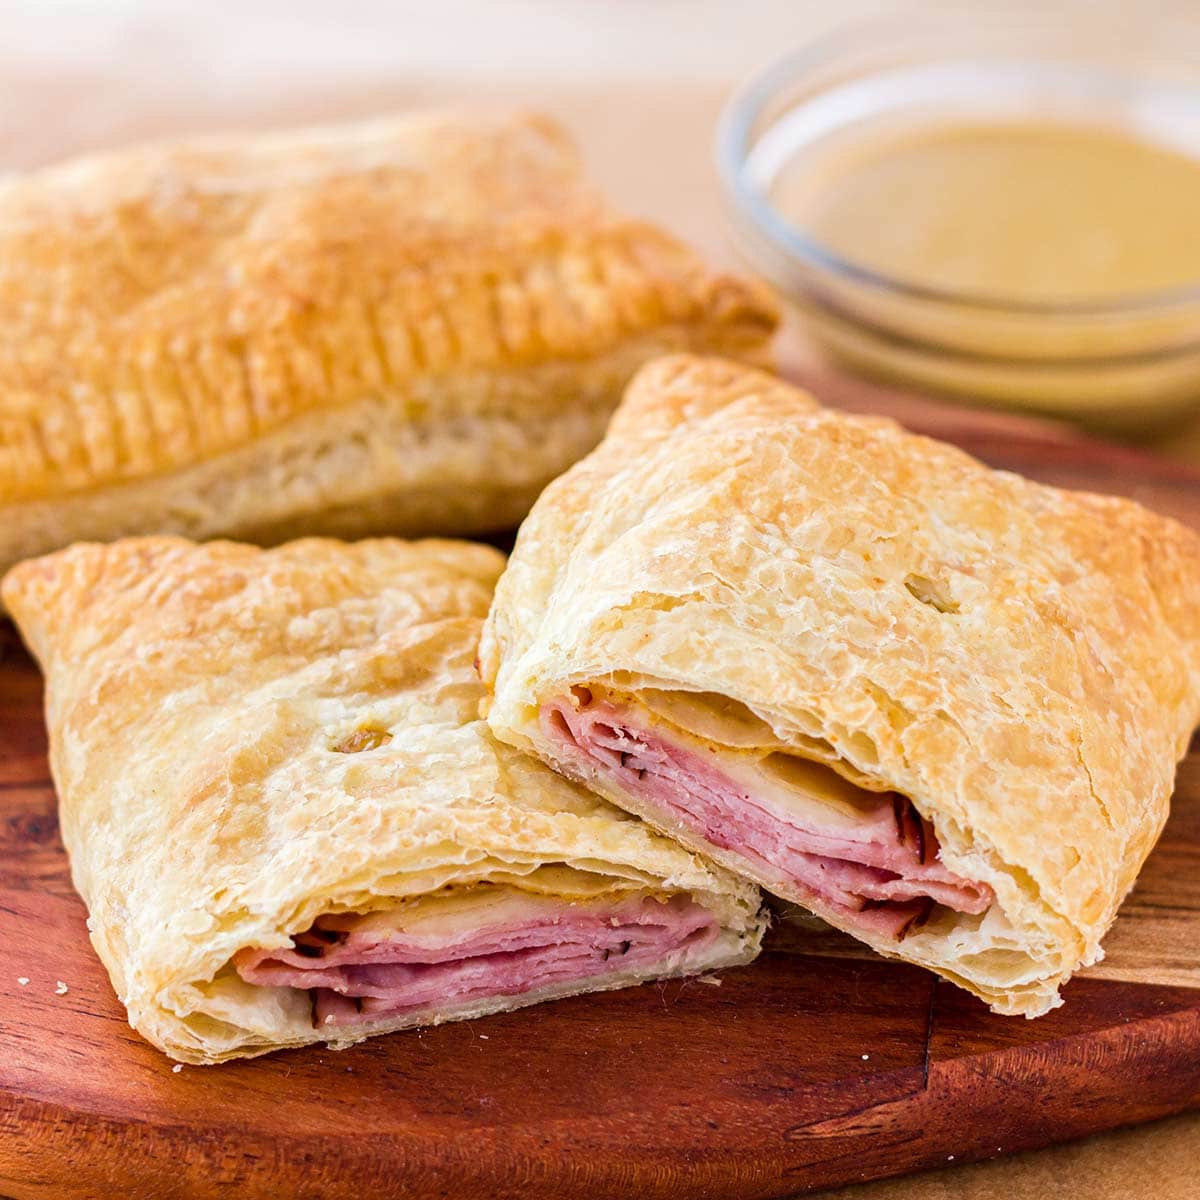 Homemade ham and cheese hot pockets made with puff pastry, on wooden cutting board with mustard dipping sauce in background.